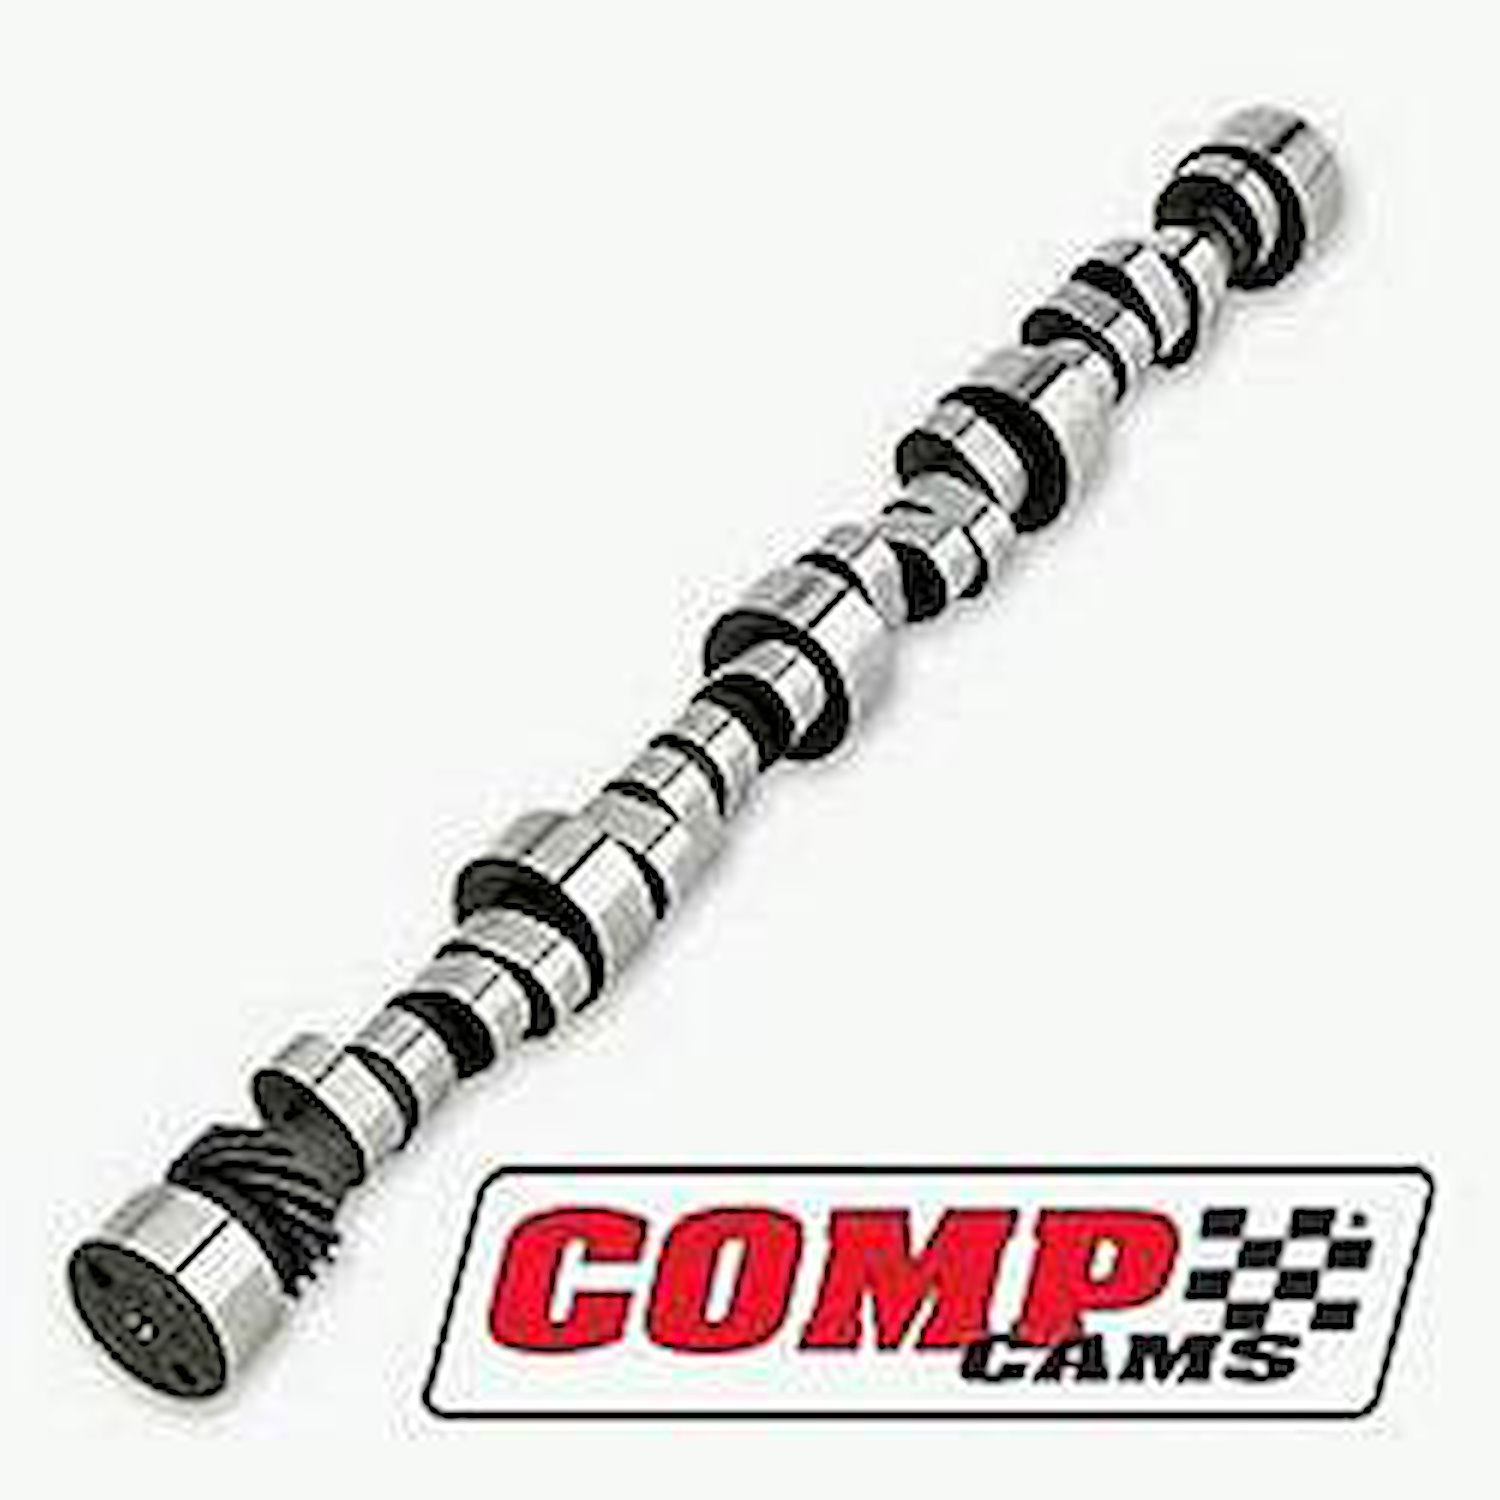 XFI Hydraulic Flat Tappet Camshaft Small Block Chevy 262-400ci 1955-98 Lift: .520"/.515" With 1.6 Rockers